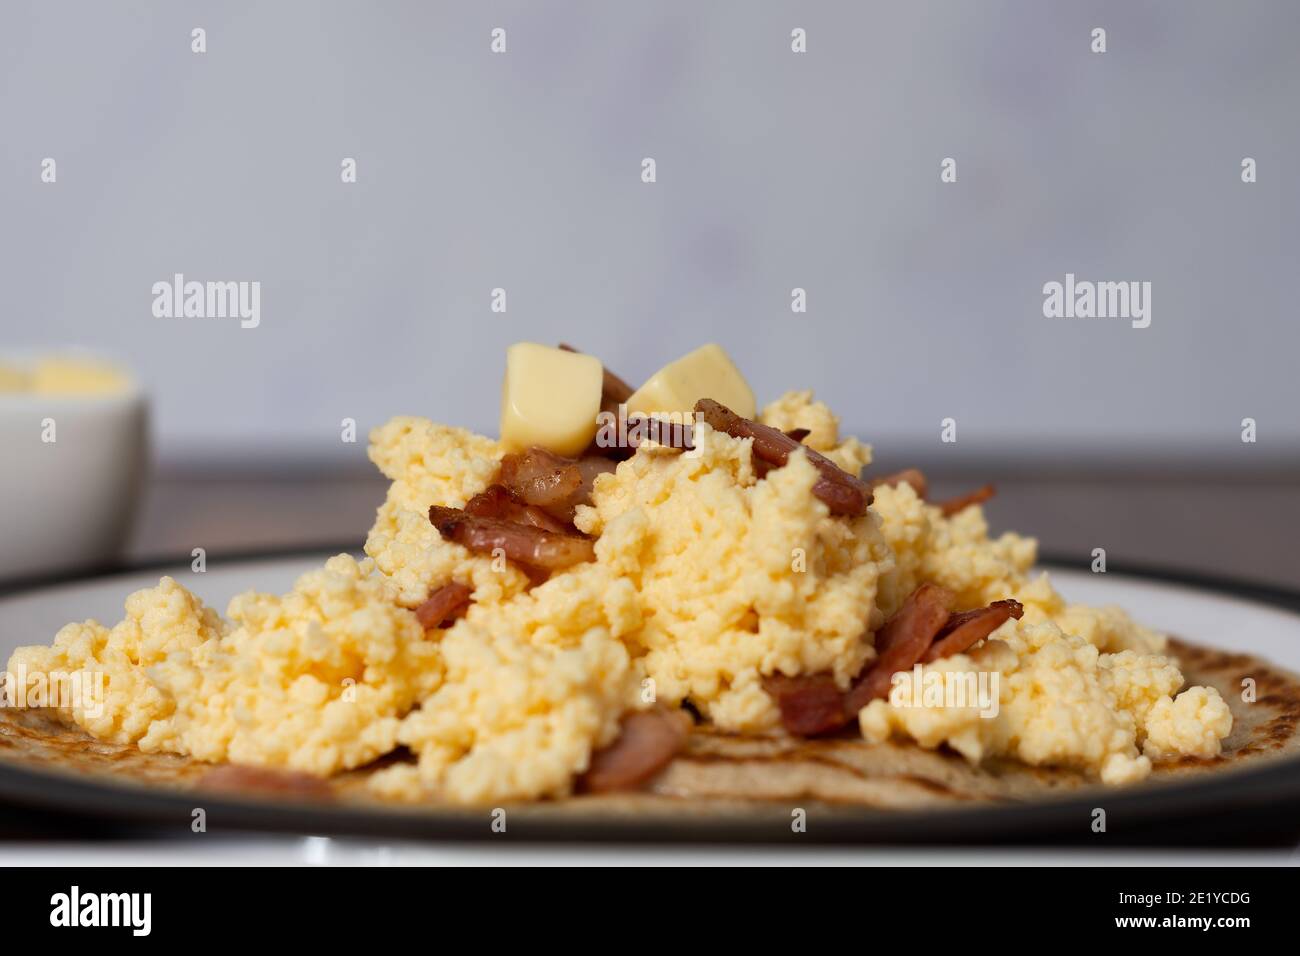 A side view of scrambled eggs and bacon on top of Derbyshire oatcakes sitting on a black rimmed plate. A butter dish is out of focus in the background Stock Photo